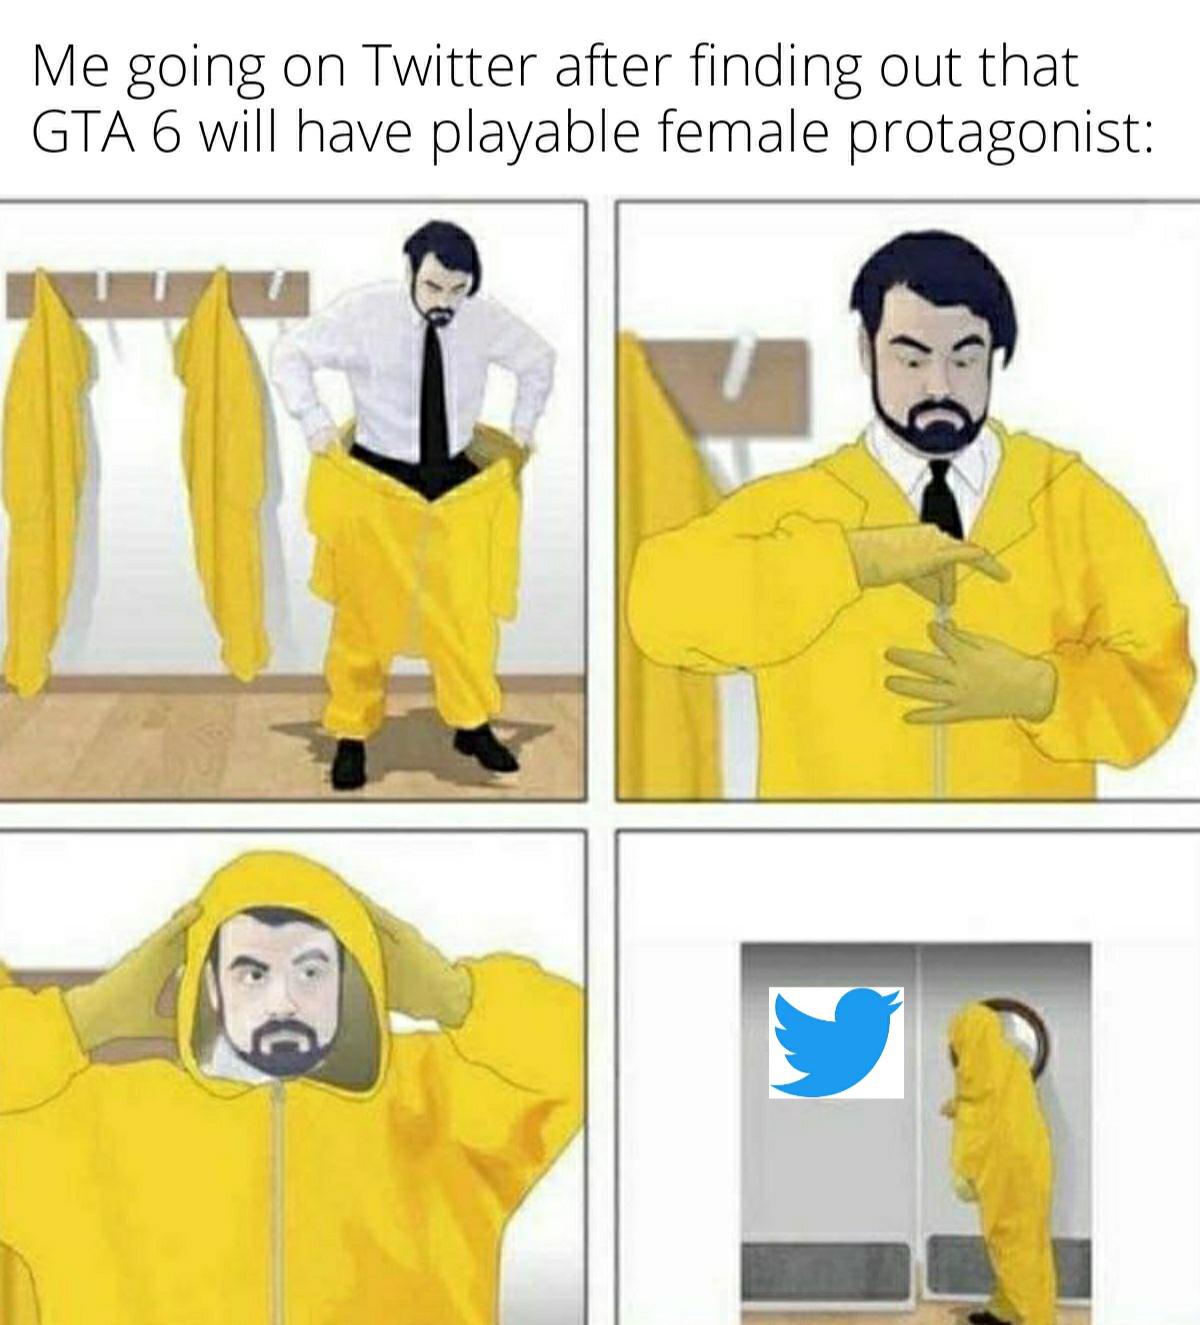 funny tweets - cartoon - Me going on Twitter after finding out that Gta 6 will have playable female protagonist